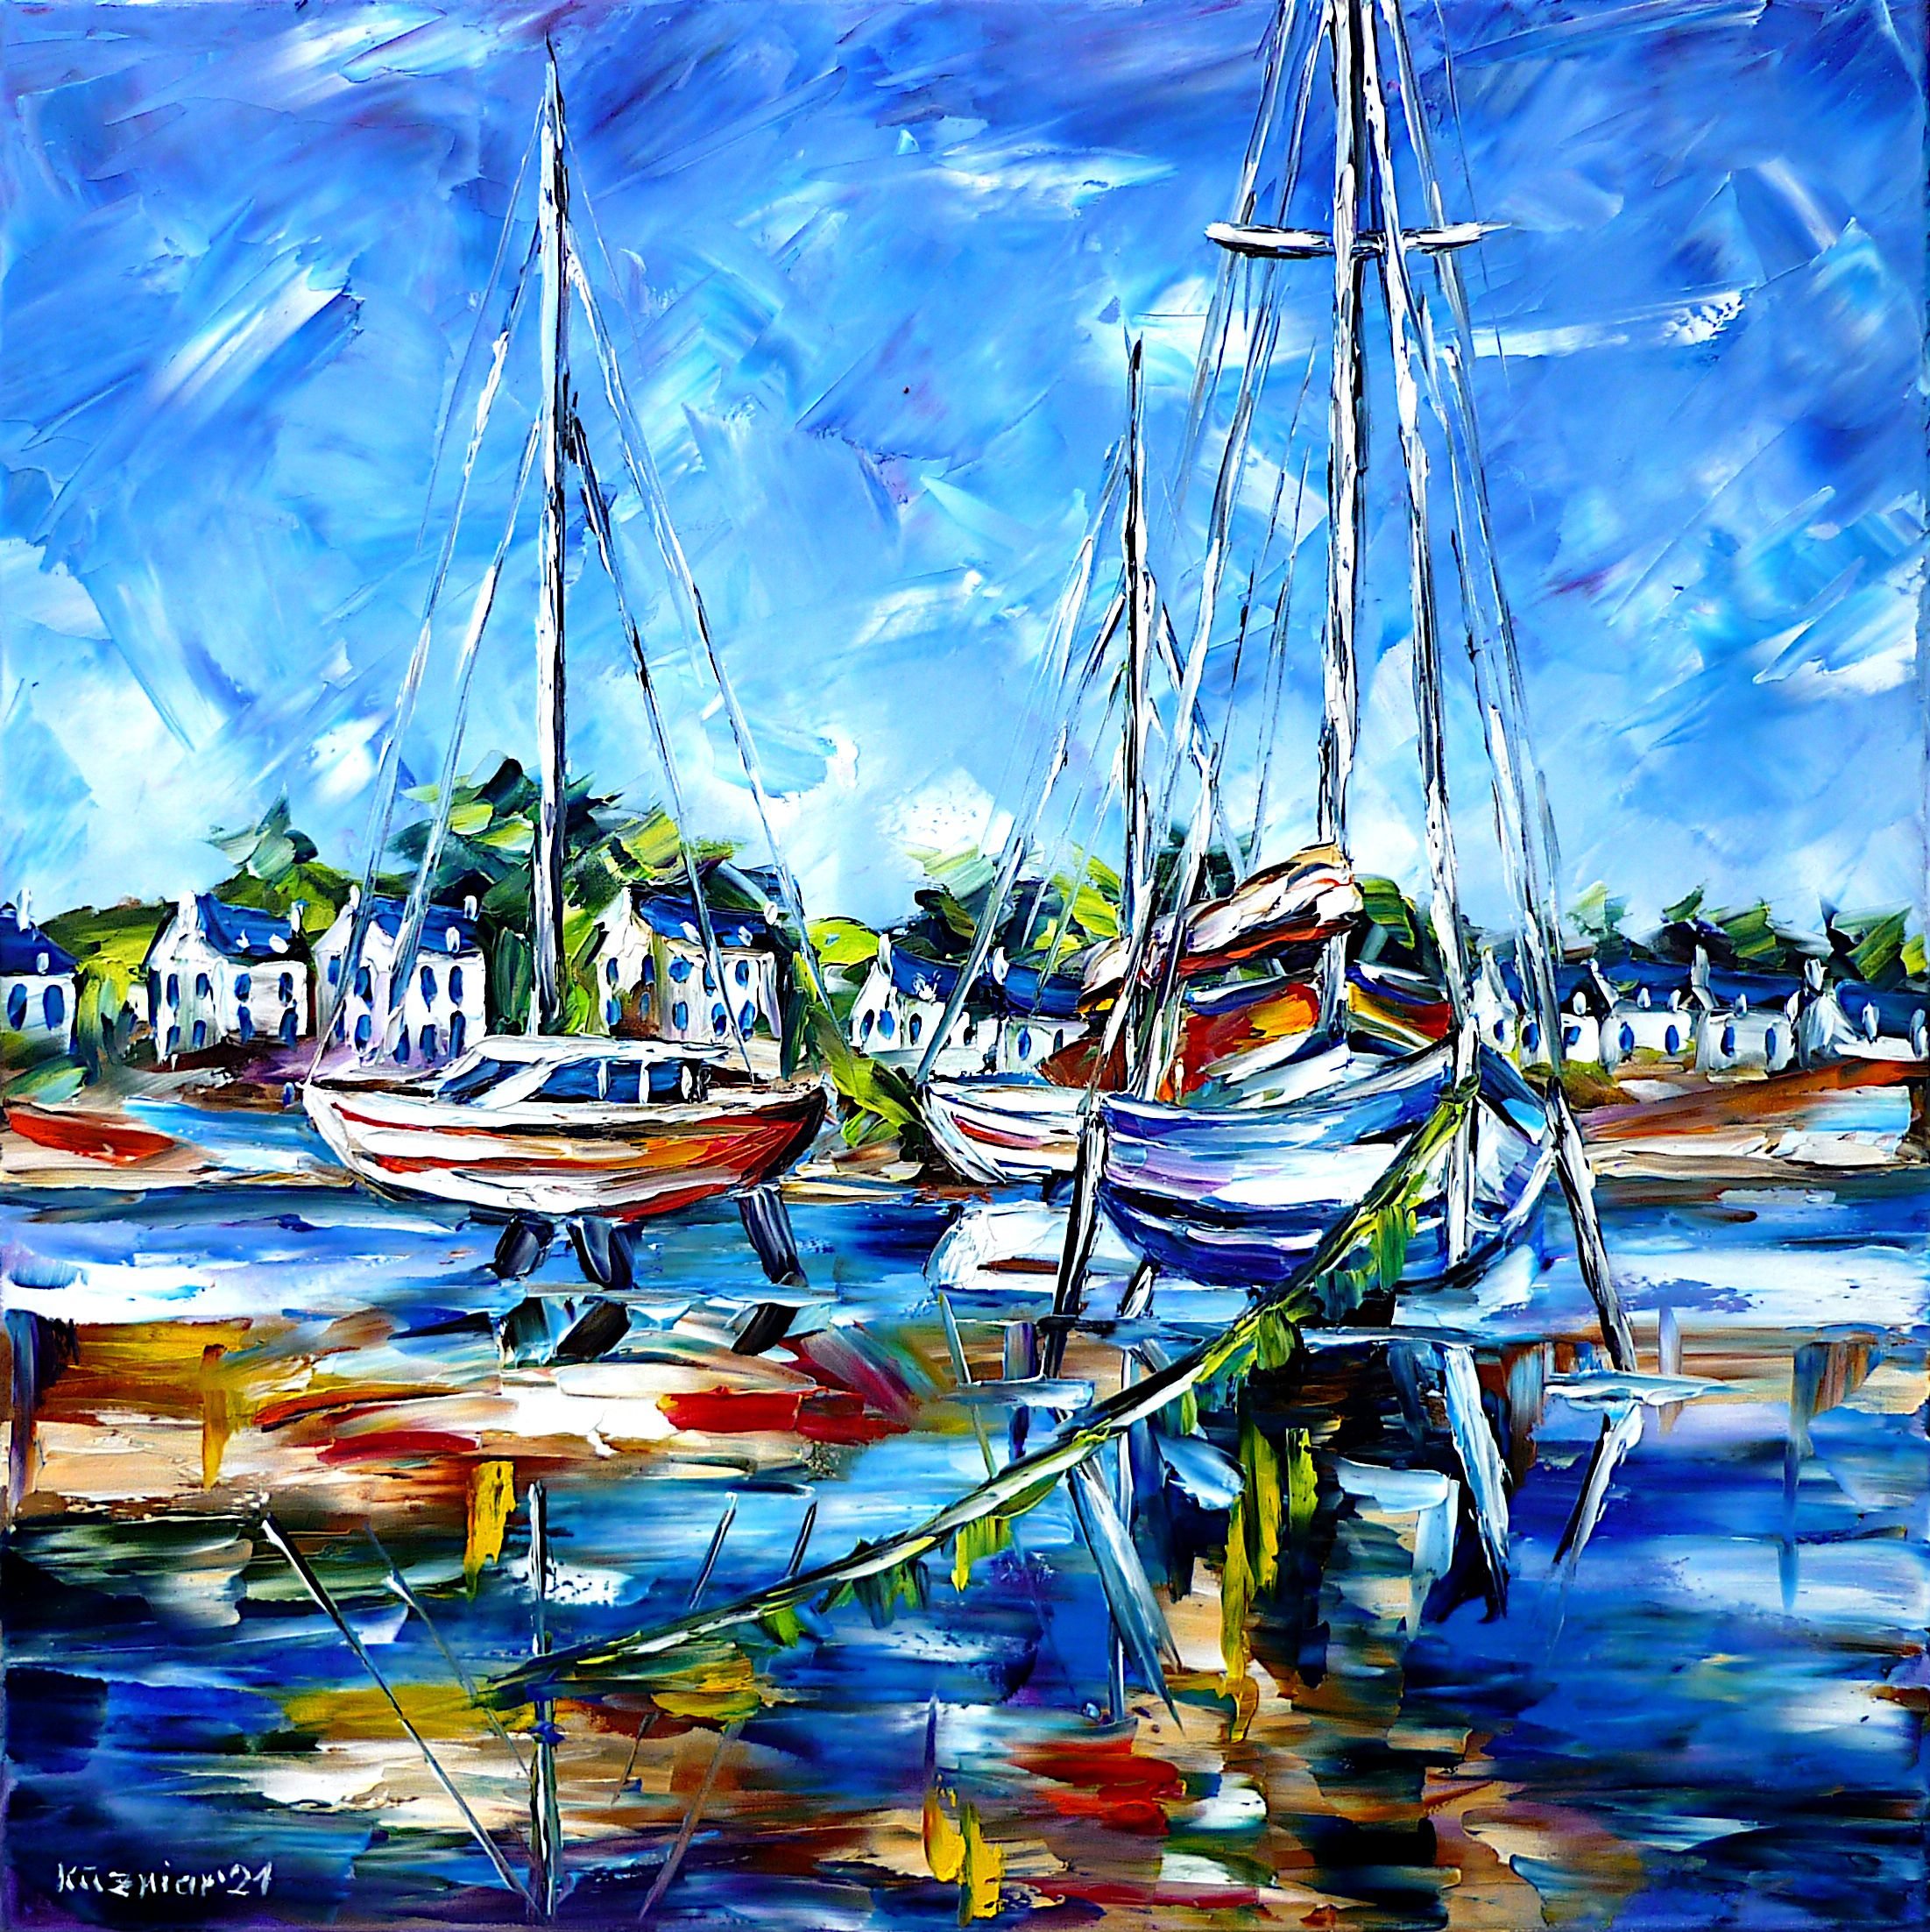 boats on wooden piles,boats on the shore,anchorage,northern France,boats in port,port in Brittany,harbor scene,boats in the harbor,harbor in Brittany,port village of Brittany,sailing boats,fishing boats,port scene,beautiful Brittany,Brittany love,boats paintings,boats love,beautiful France,houses in Brittany,village in Brittany,fishing village,boats on the beach,brittany landscape,white houses blue roofs,i love brittany,brittany sky,beach painting,beach picture,blue sky,square format,square picture,square painting,blue colors,blue painting,shades of blue,blue tones,palette knife oil painting,modern art,impressionism,abstract painting,lively colours,colorful painting,bright colors,light reflections,impasto painting,figurative